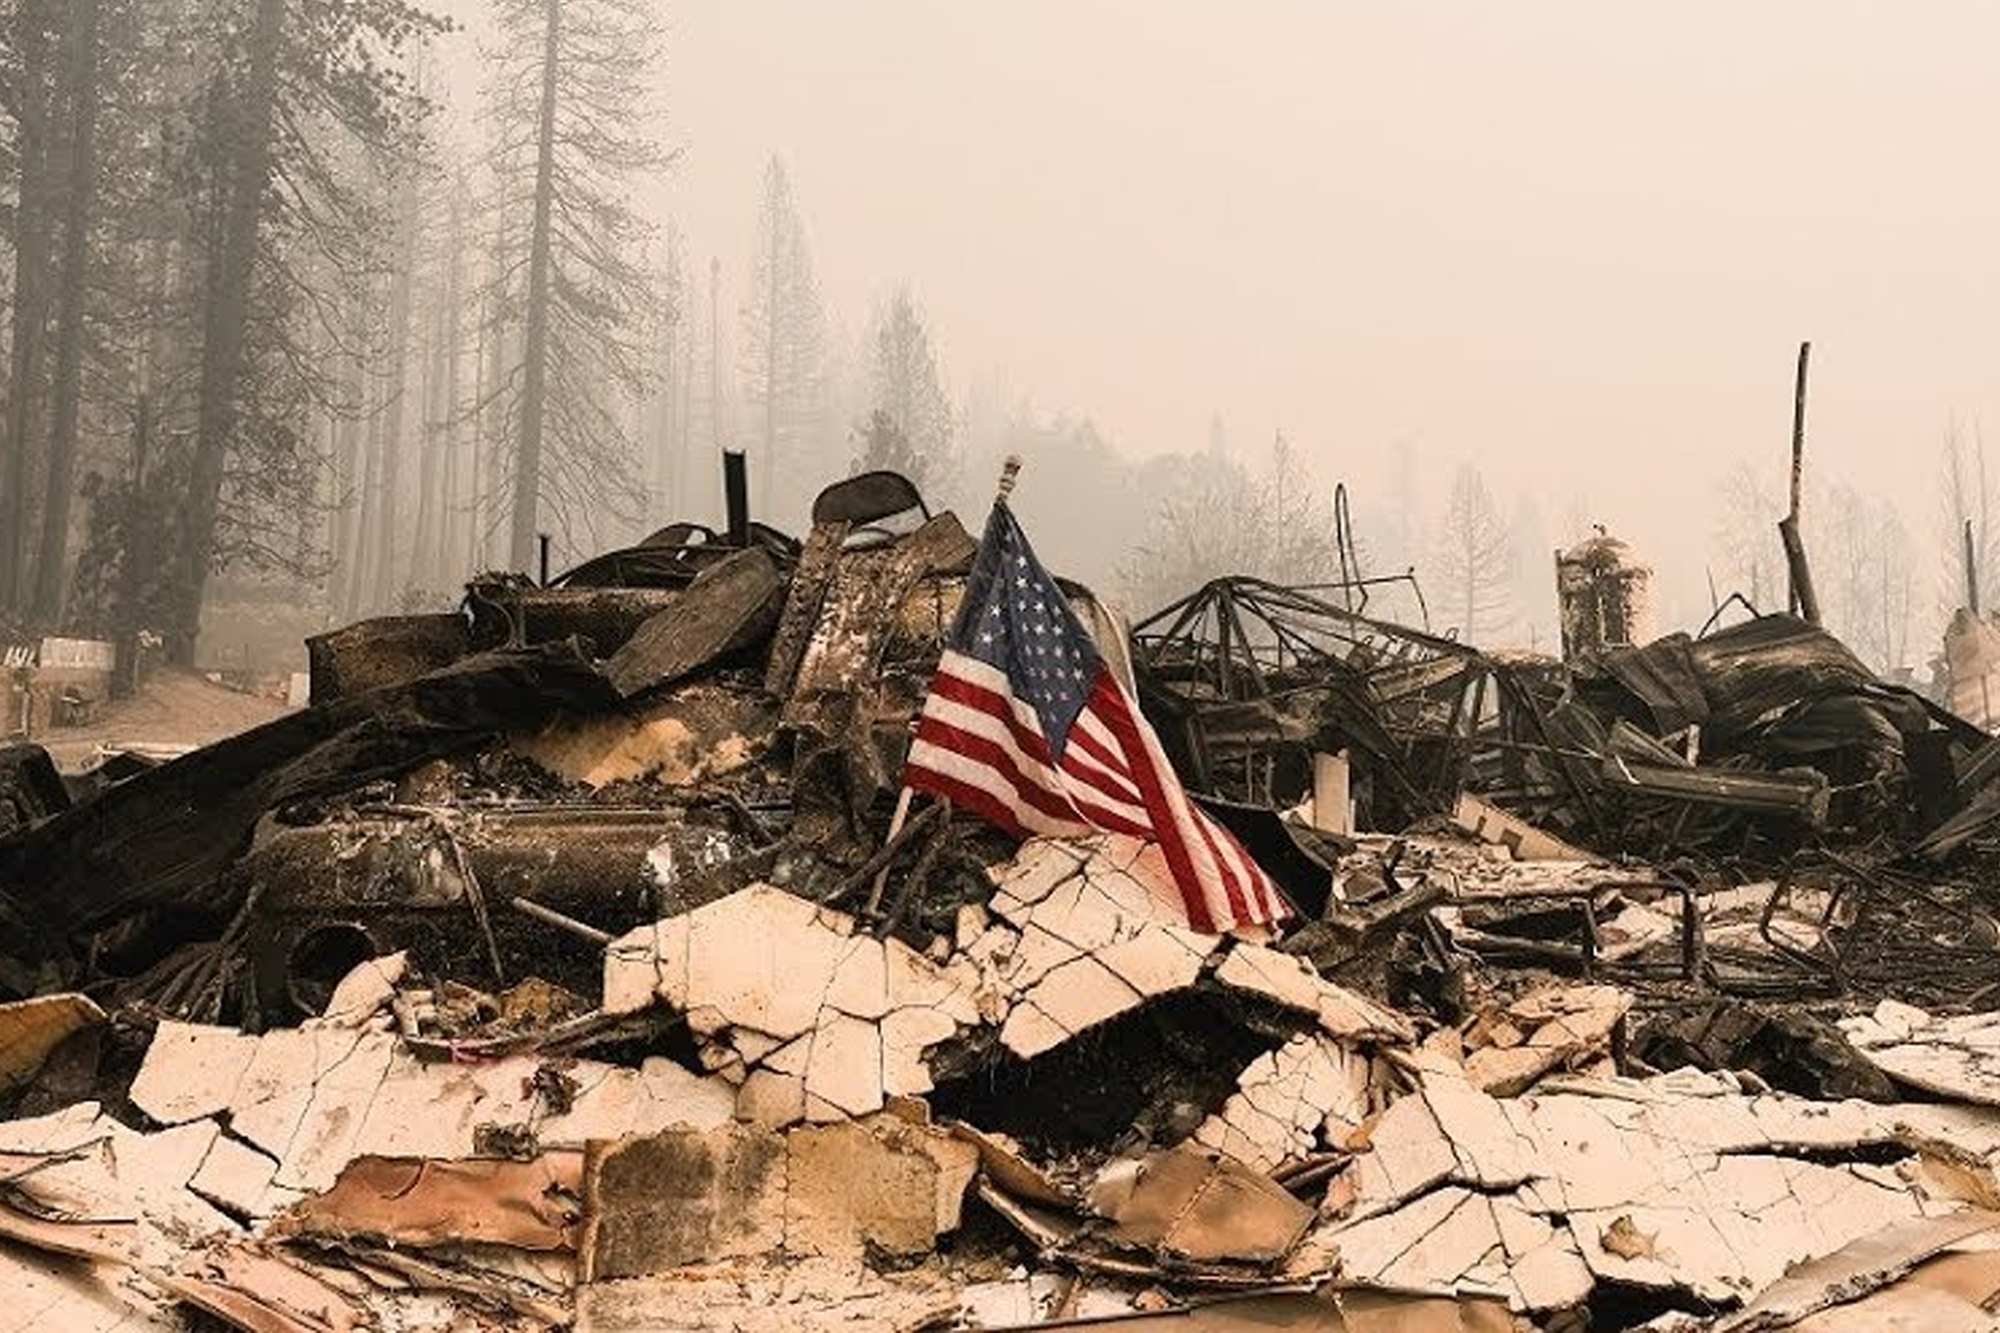 Wildfire, American flag